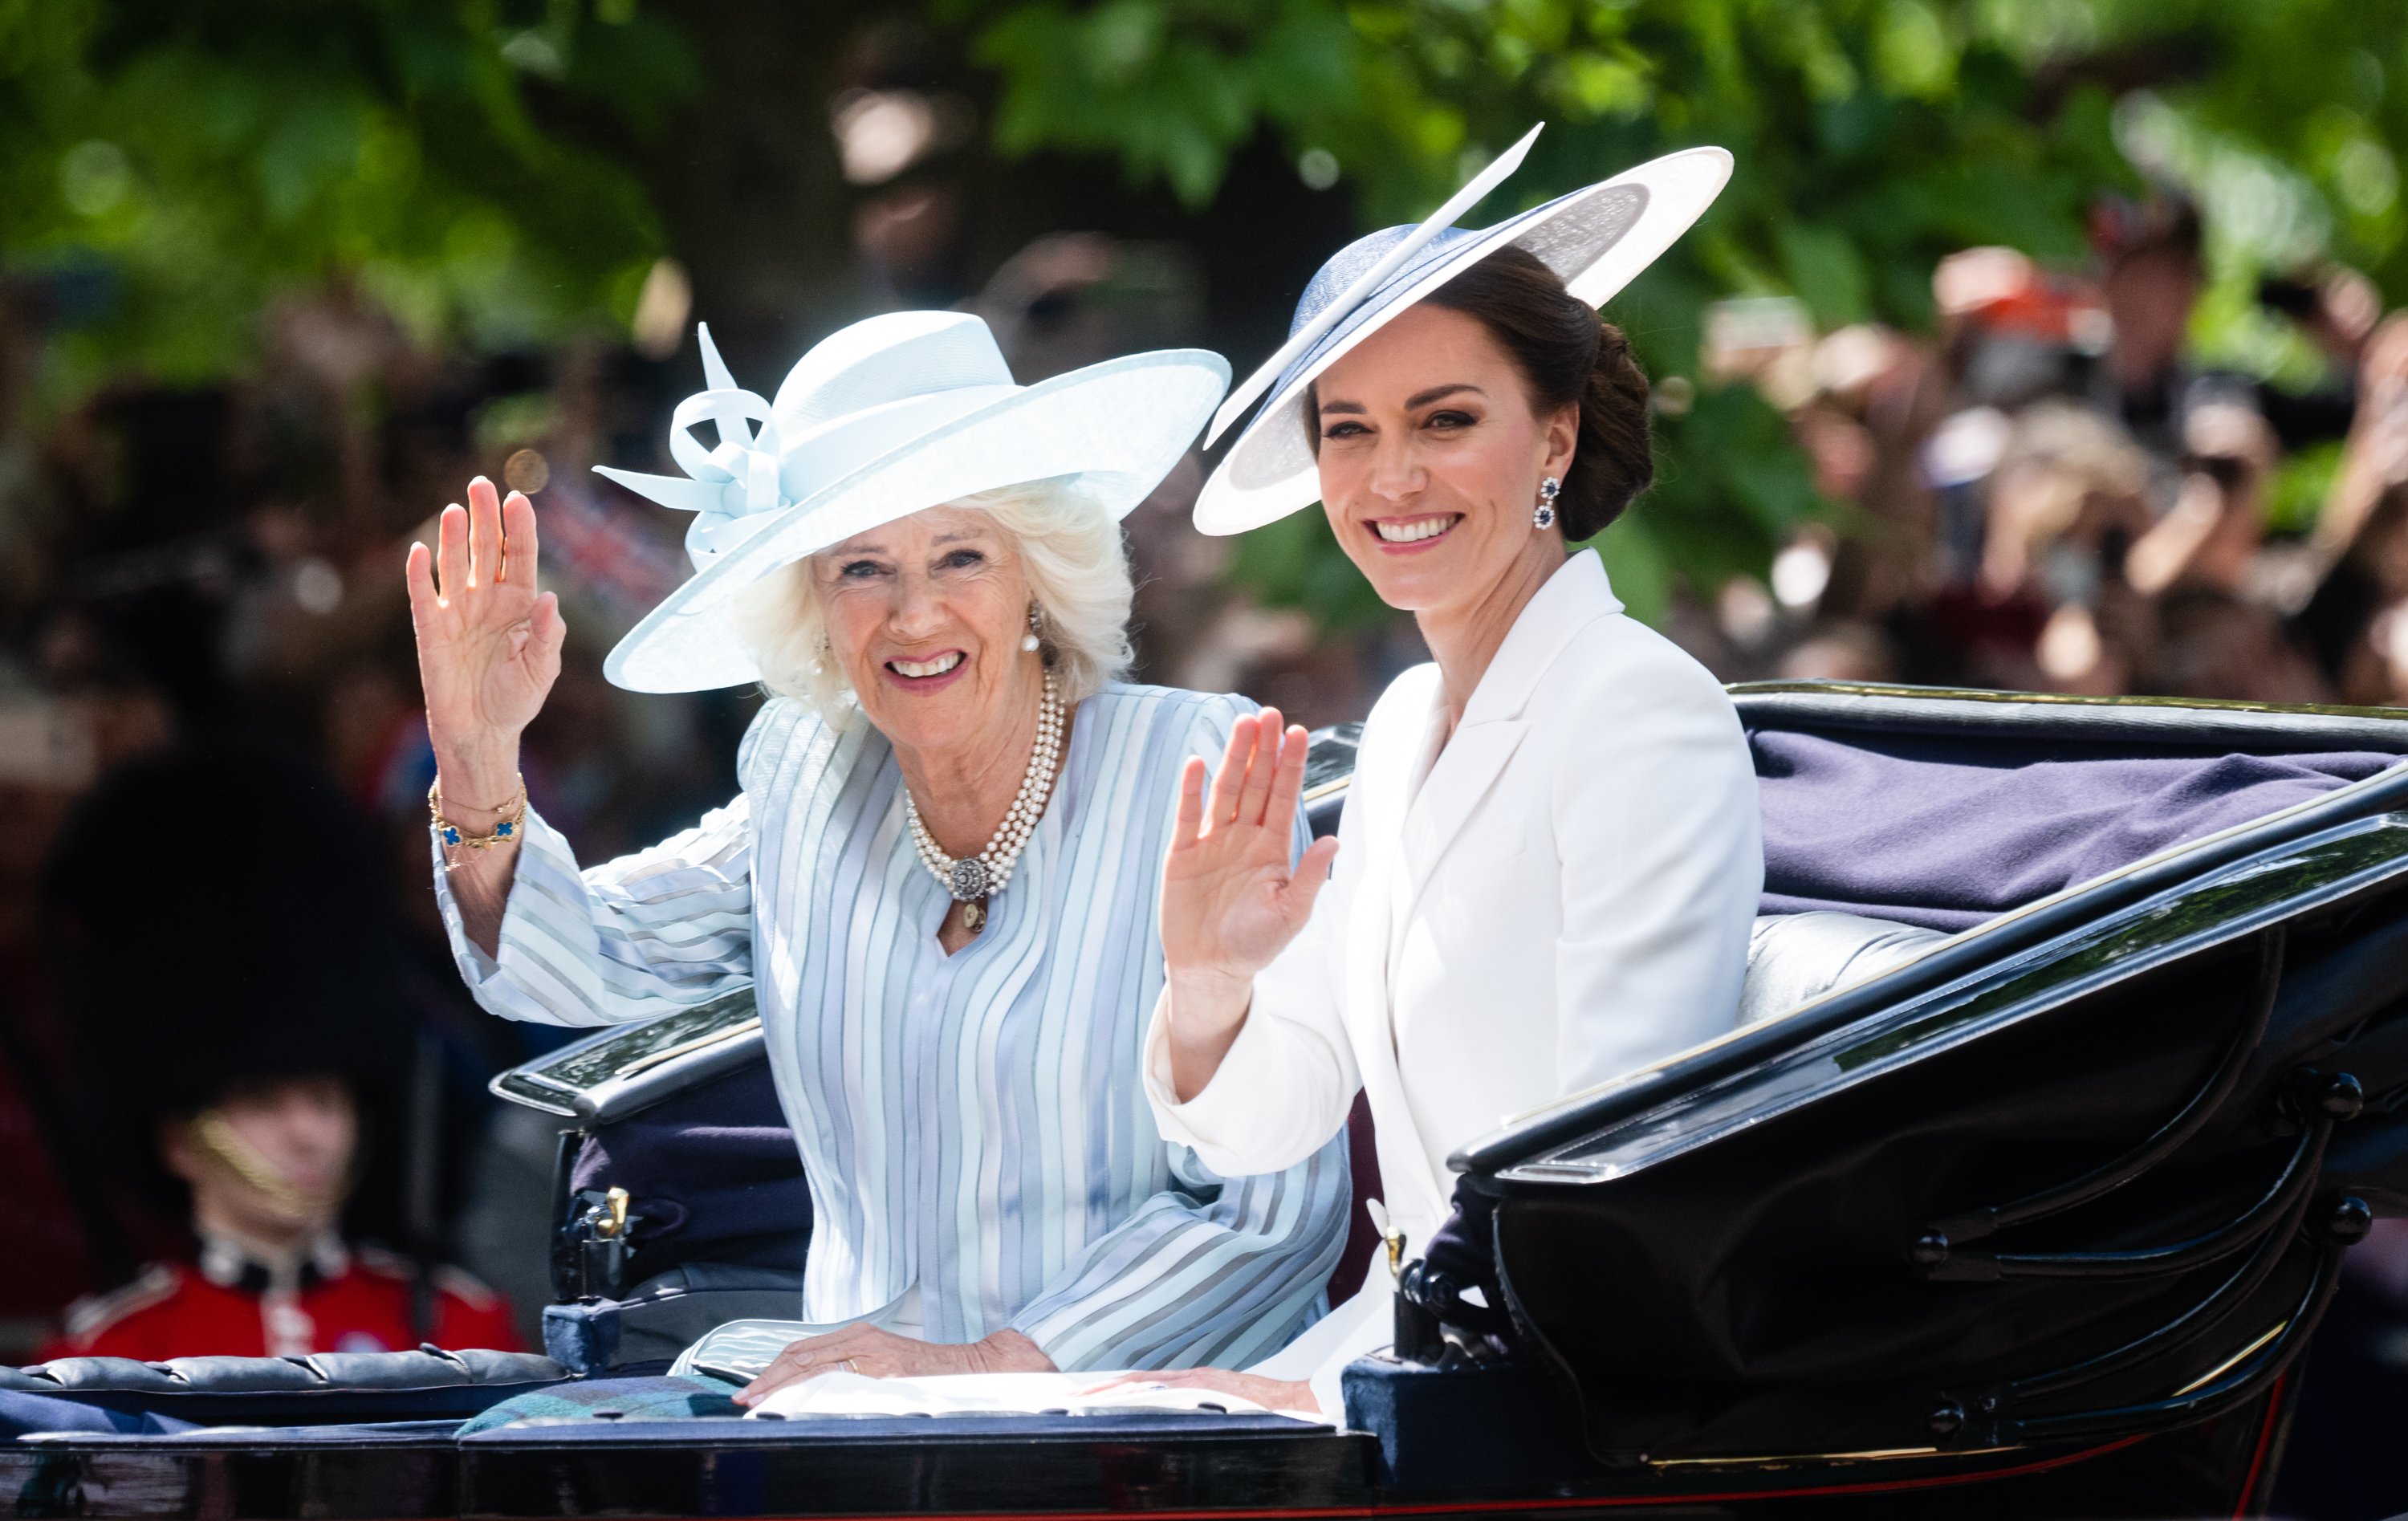 Duchess Camilla and Duchess Kate in a carriage at Trooping the Colour on June 2, 2022, in London, England. | Source: Getty Images